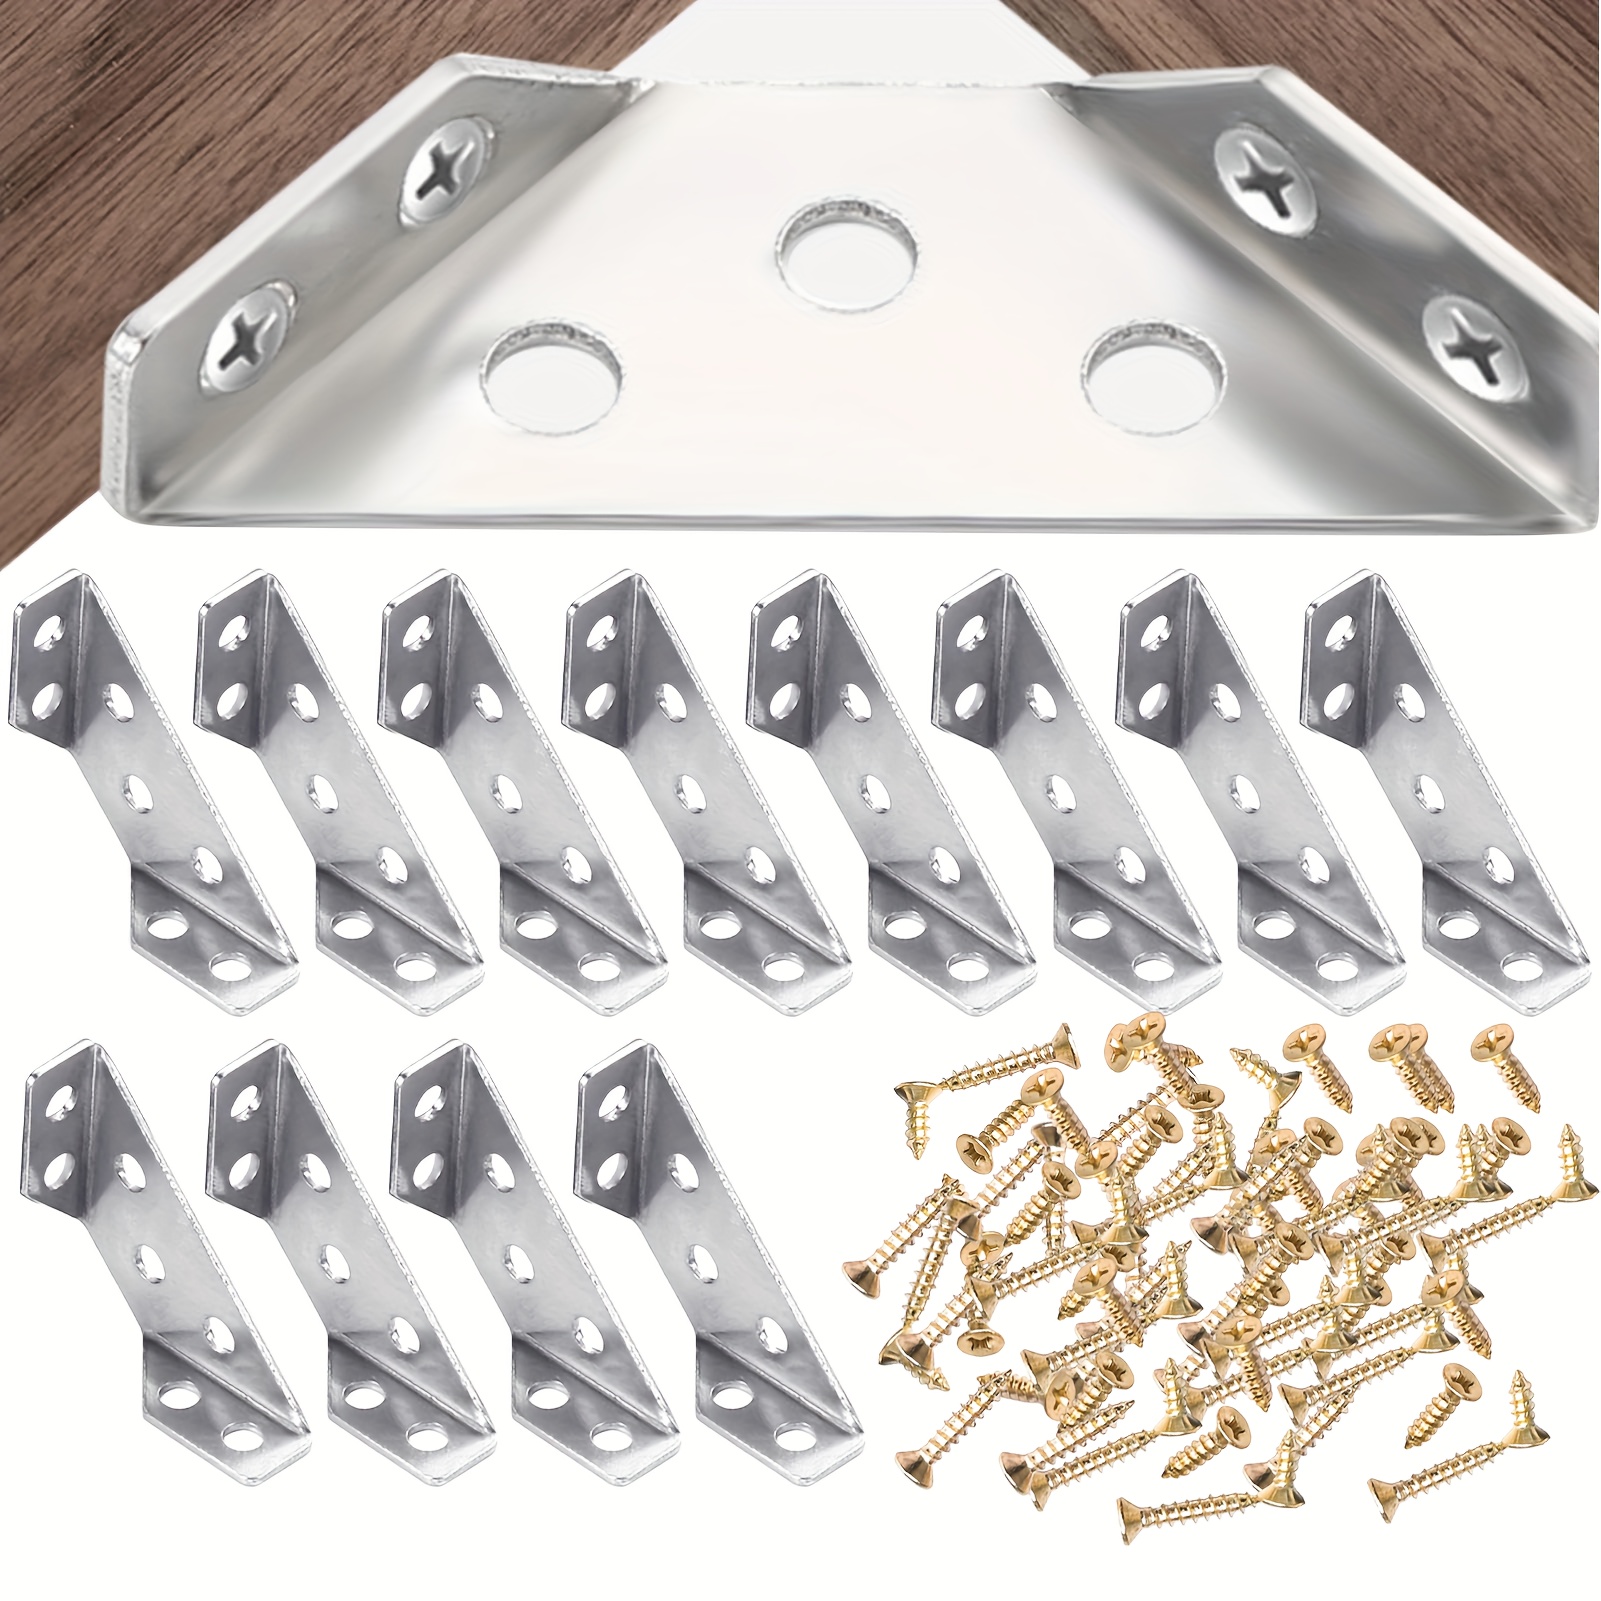 

96pcs (12 Corner Codes And 84 Installation Screws) Multifunctional Thickened Corner Codes 90 Degree Right Angle Stainless Steel Corner Iron Fixed Bracket Furniture Wood Board Iron Connectors